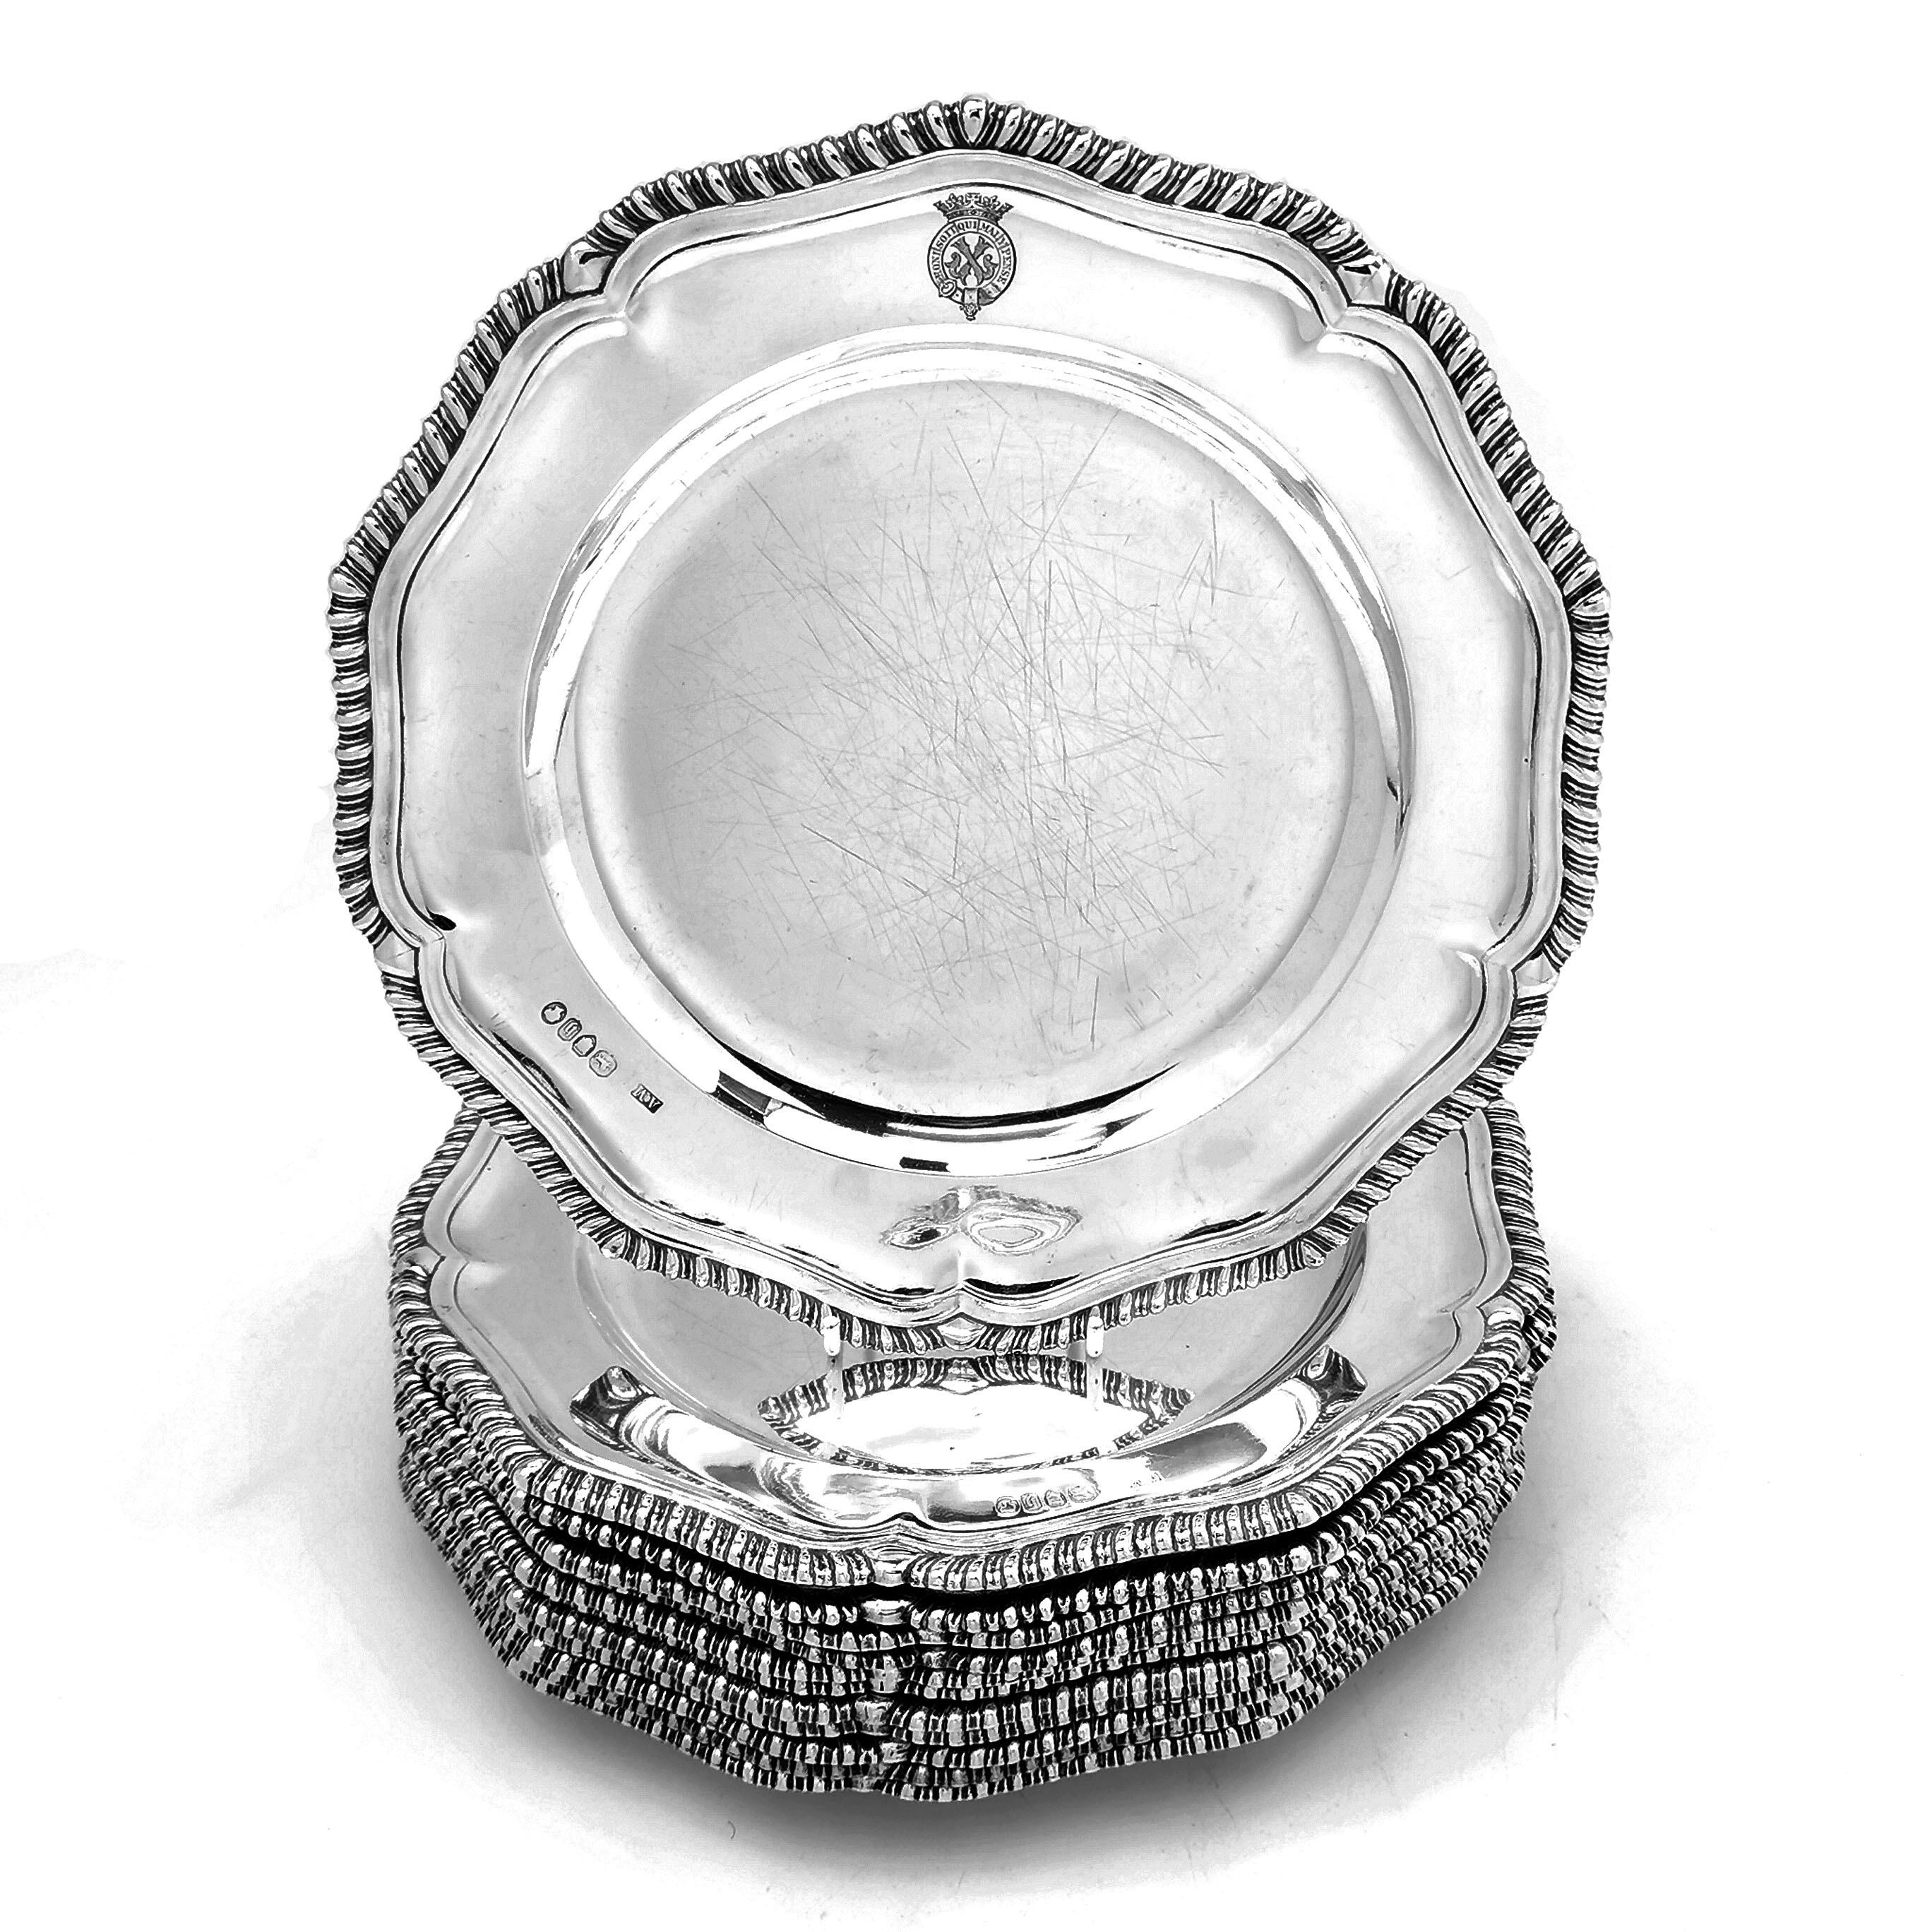 A set of 12 classic Antique Victorian Solid Silver Dinner plates with a traditional shaped gadroon edge border. Each Plate has a engraved crest with the words 'Honi soit qui mal y pense' engraved in the symbol of a garter topped with a crown.
The